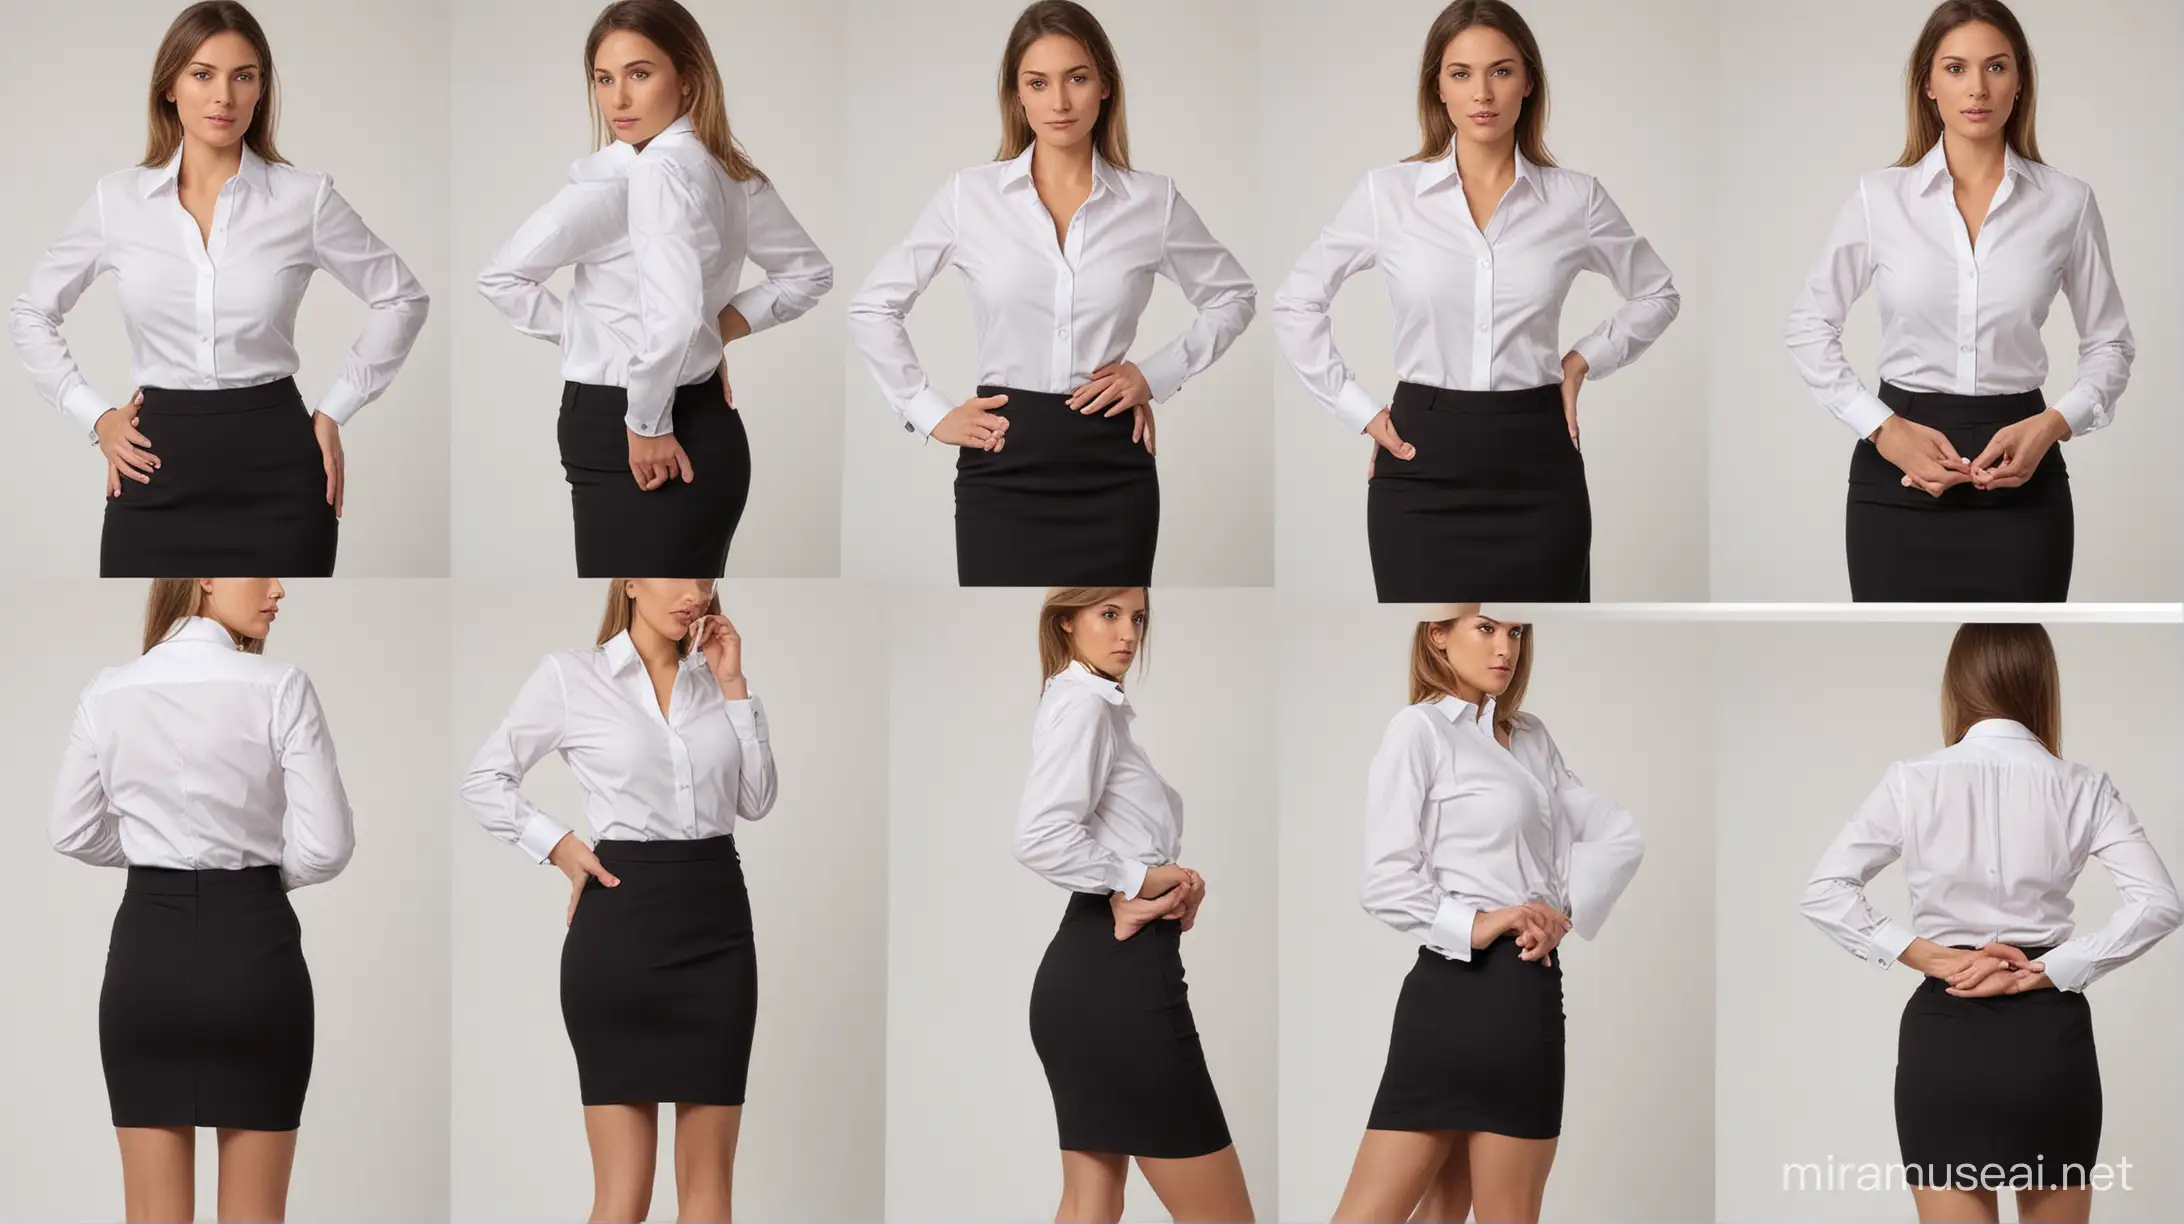 a series of smaller pictures of a woman in black business suit and white shirt, that explain how to dress / undress properly. Keeping it decent of course 
